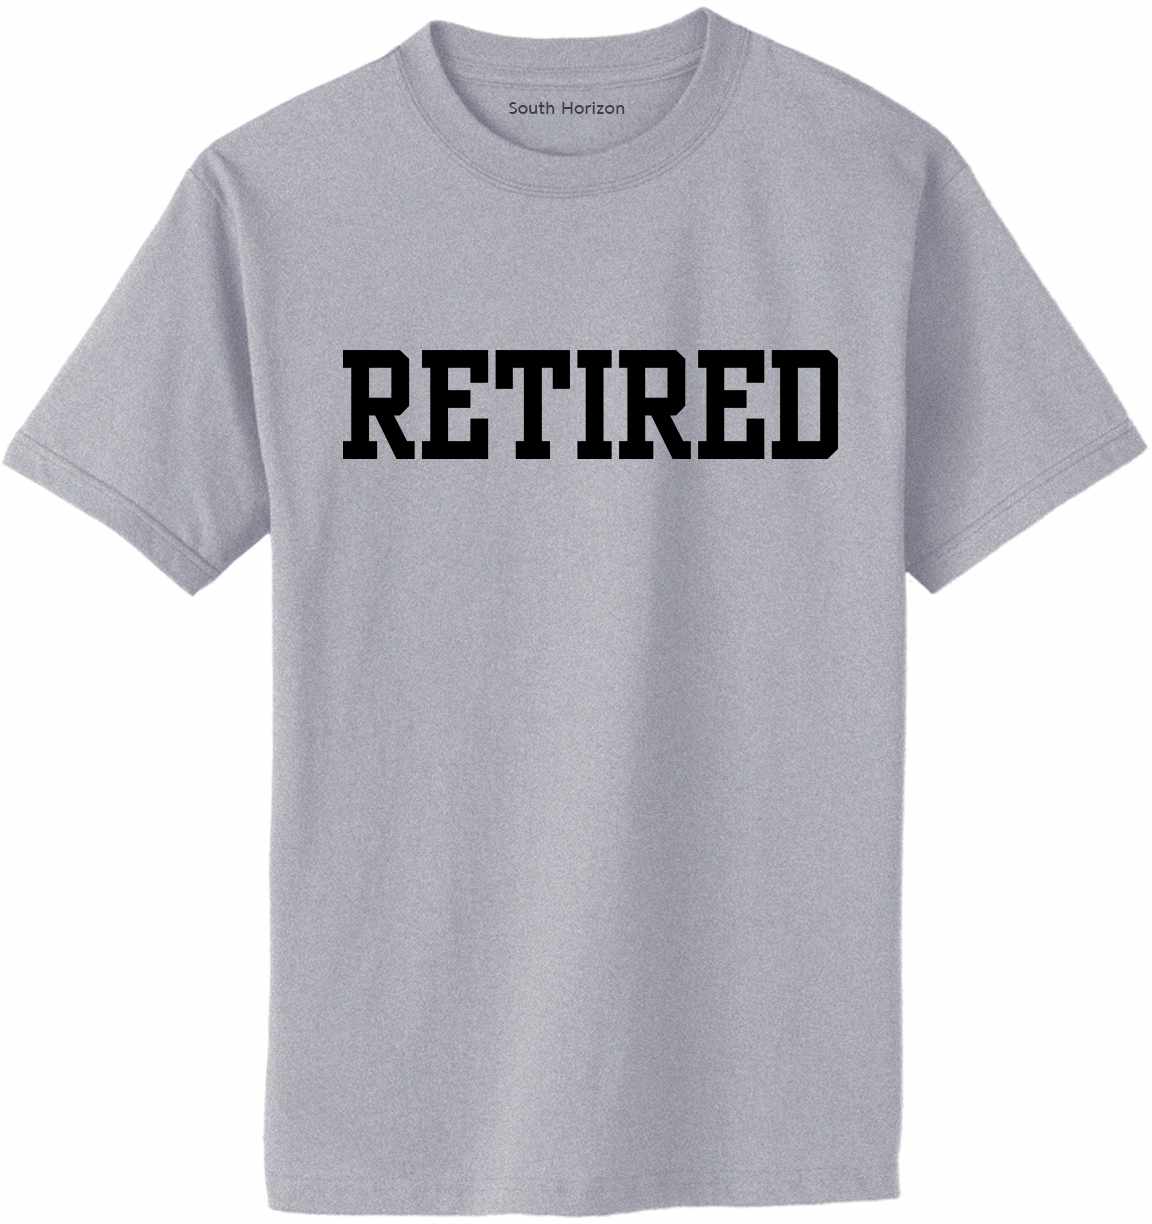 RETIRED on Adult T-Shirt (#1184-1)